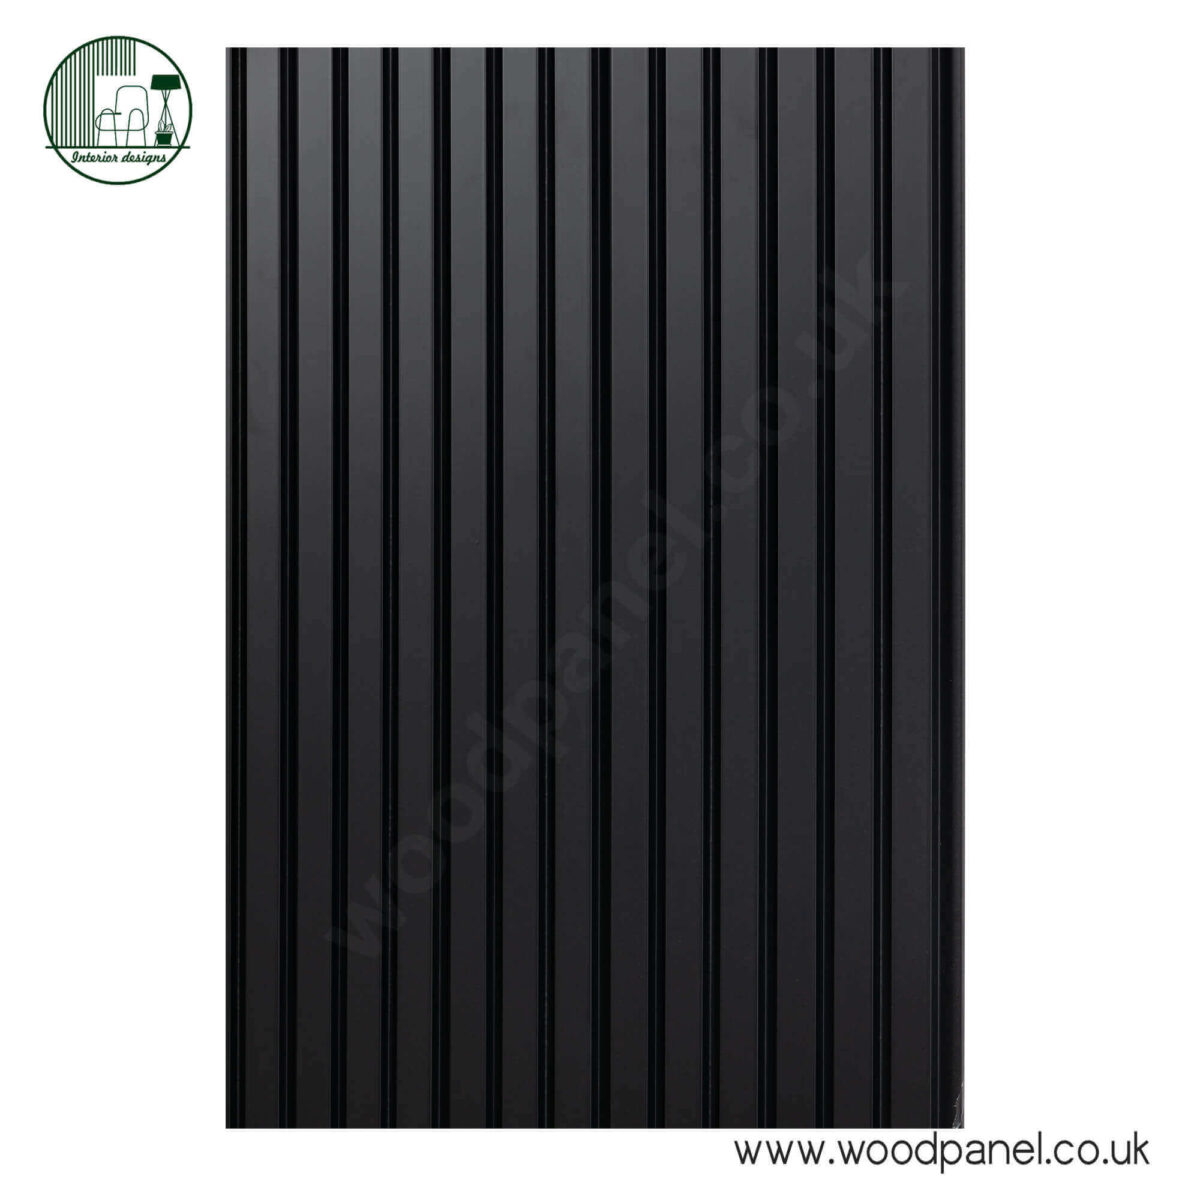 Magnum Opus Wood panel COLLECTION U899 SOFT TOUCH BLACK ST125 5 Magnum Opus Wood panel COLLECTION U899 SOFT TOUCH BLACK, ST125